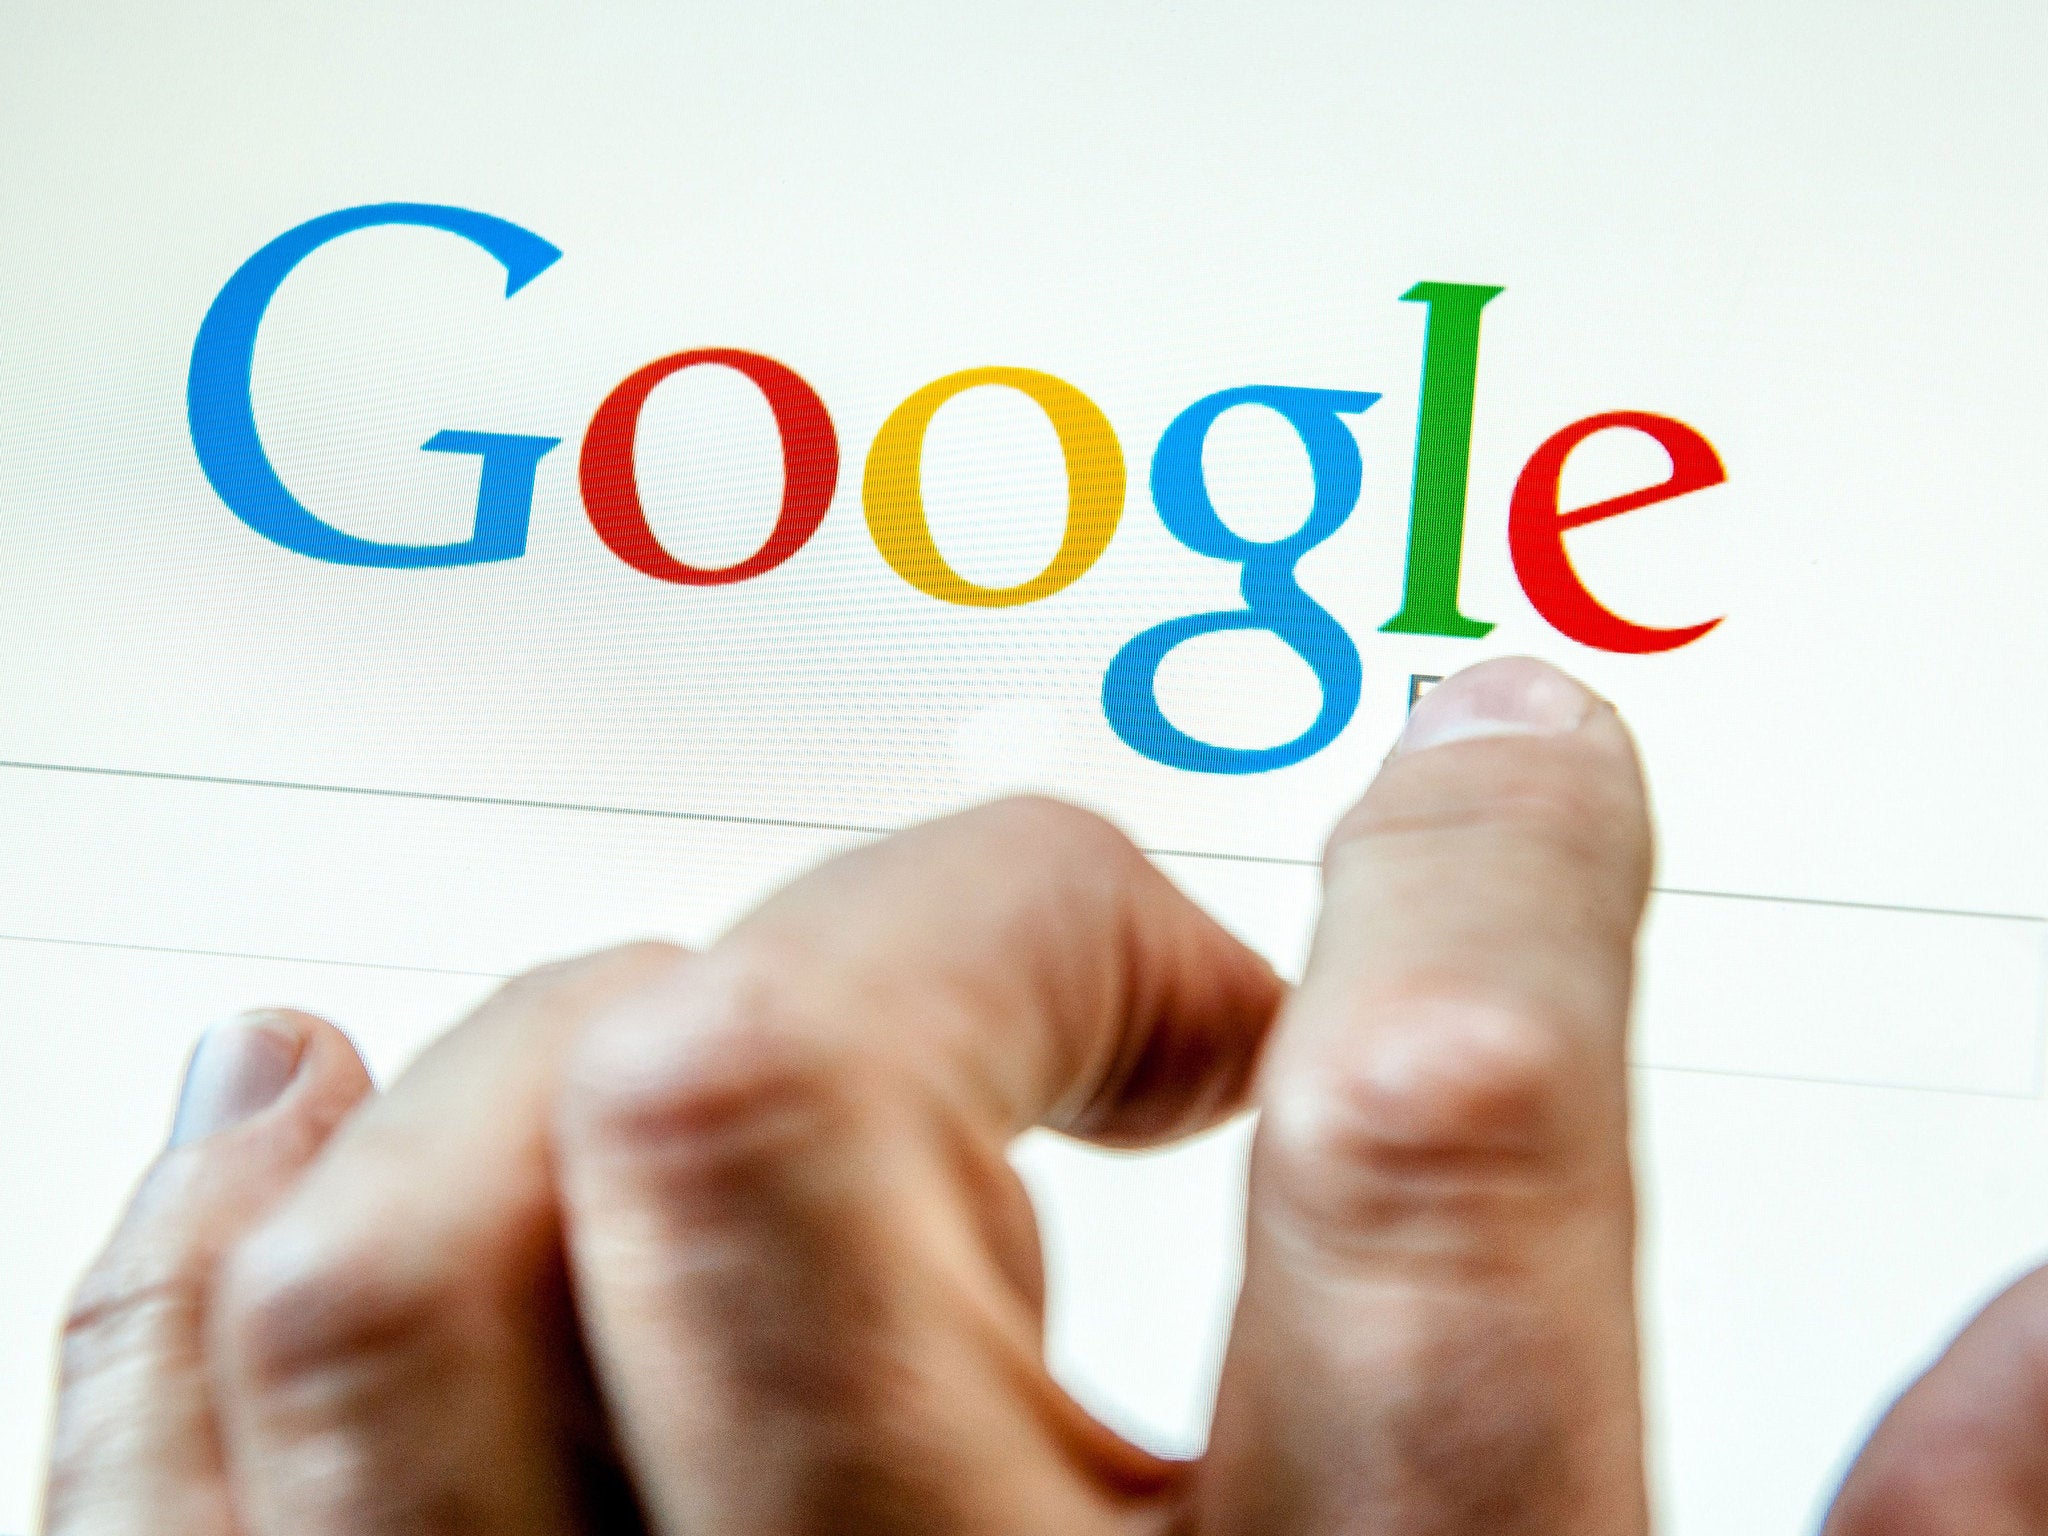 Google has to remove links that reveal details of a person's criminal history within 35 days